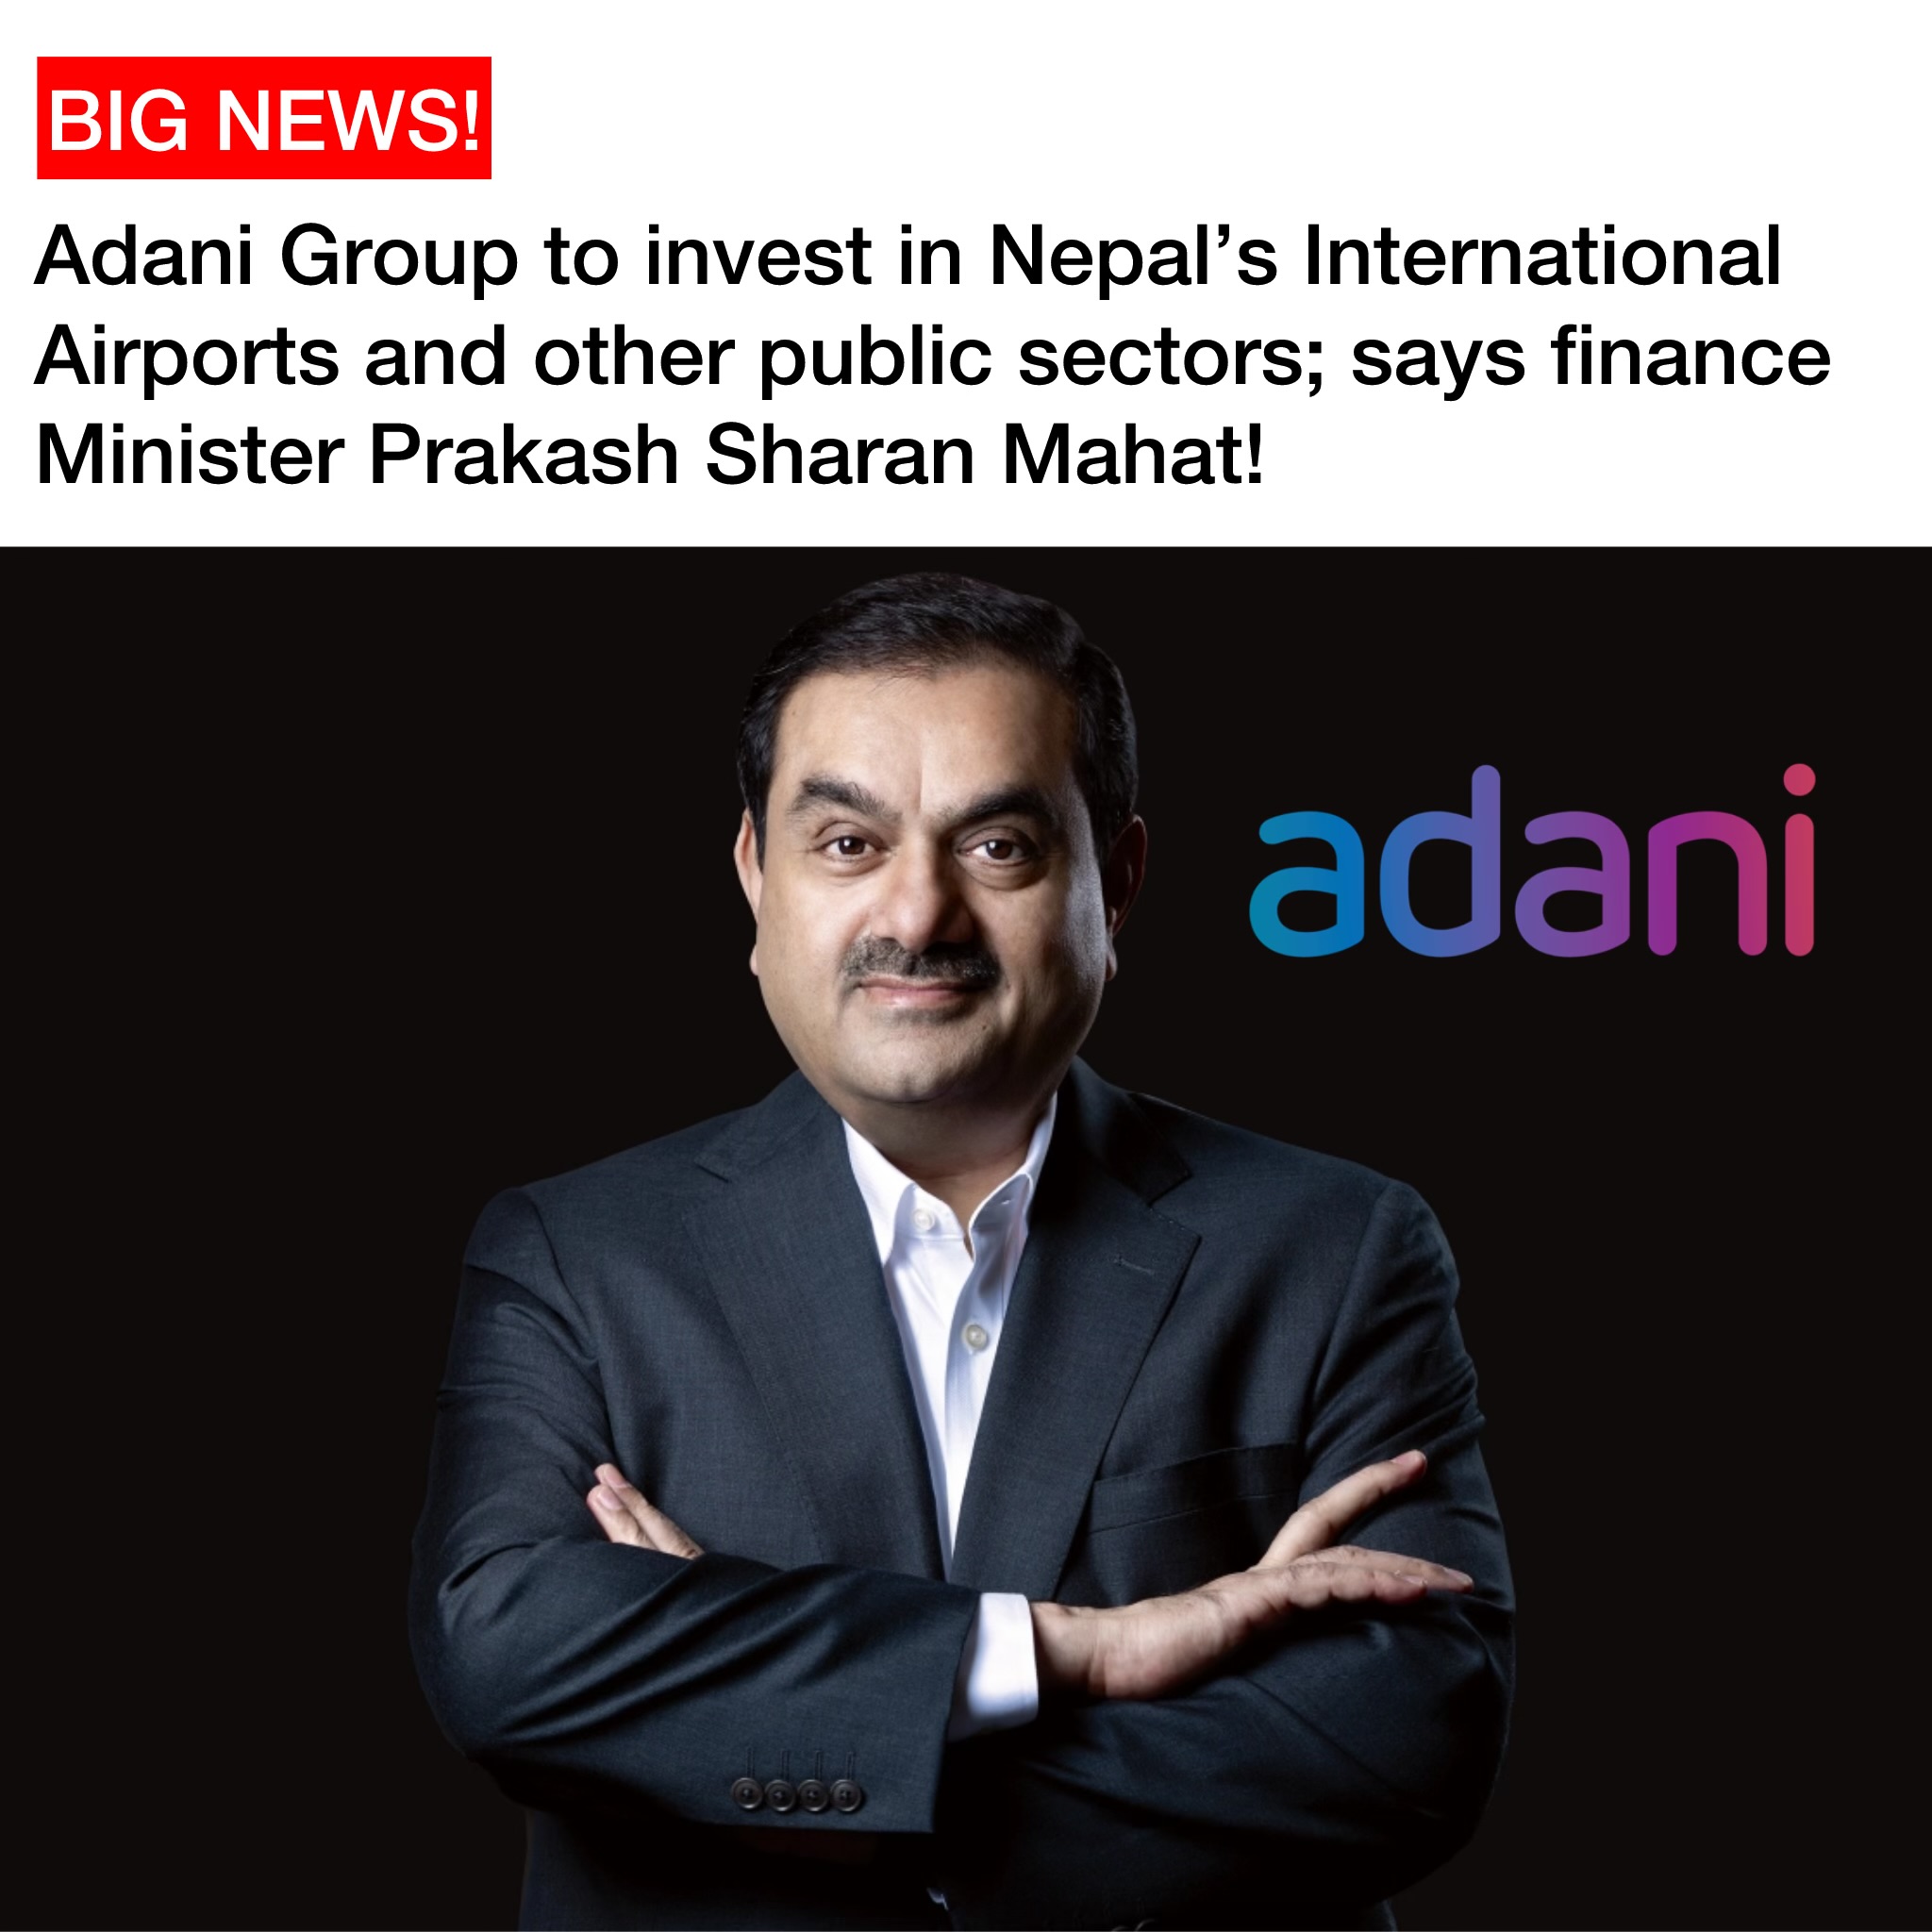 Adanai Group of India to invest in Nepal’s Airports and other public sectors, reports